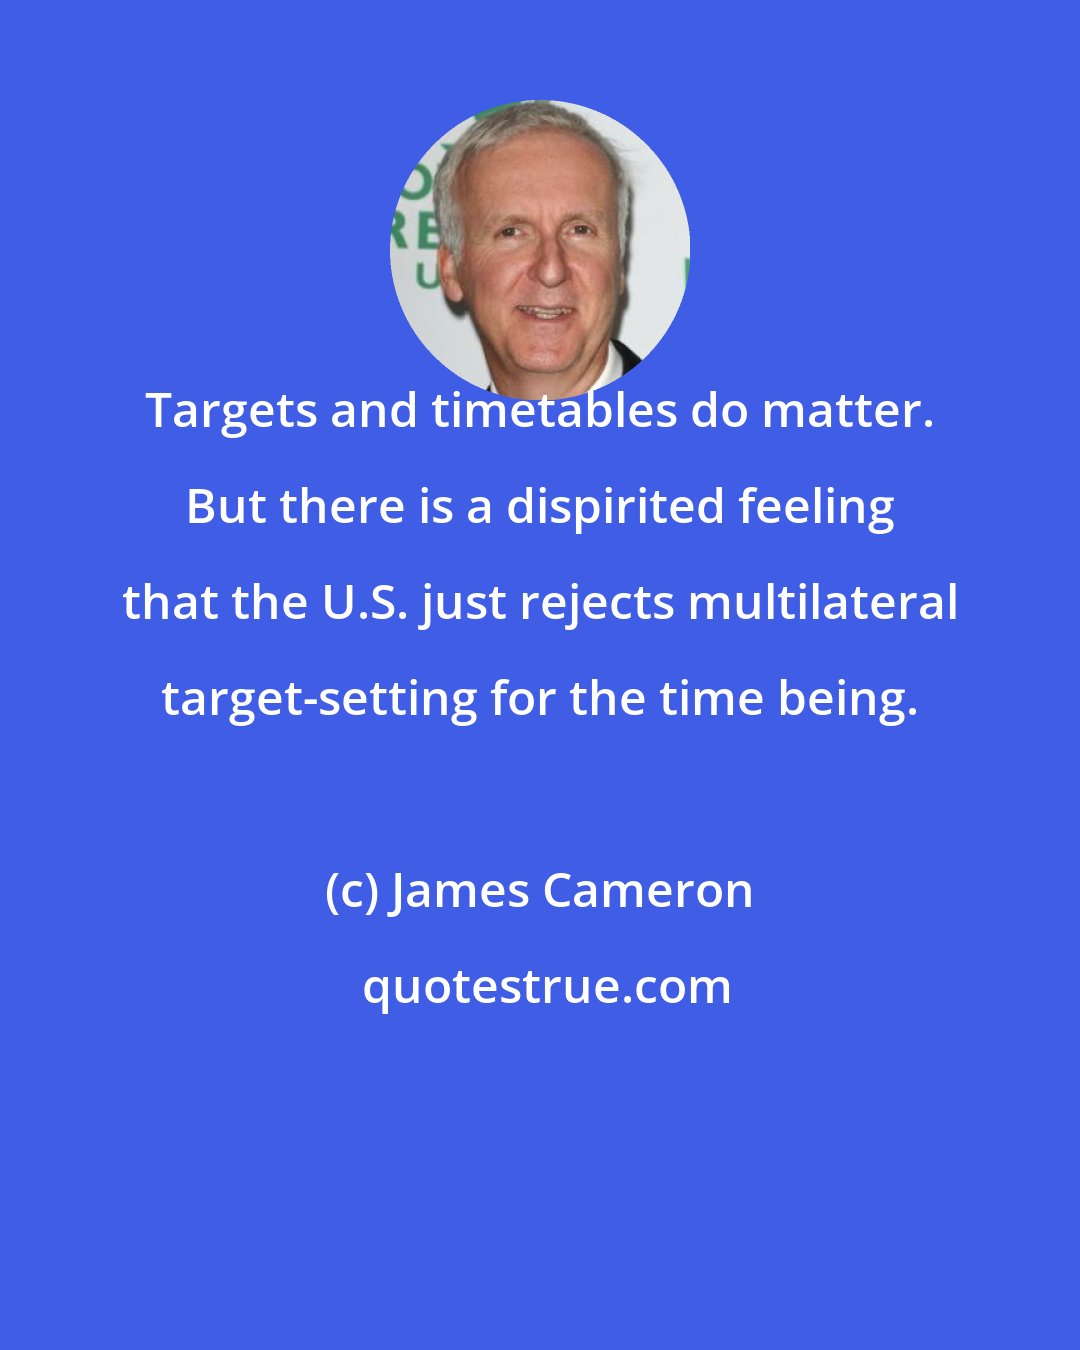 James Cameron: Targets and timetables do matter. But there is a dispirited feeling that the U.S. just rejects multilateral target-setting for the time being.